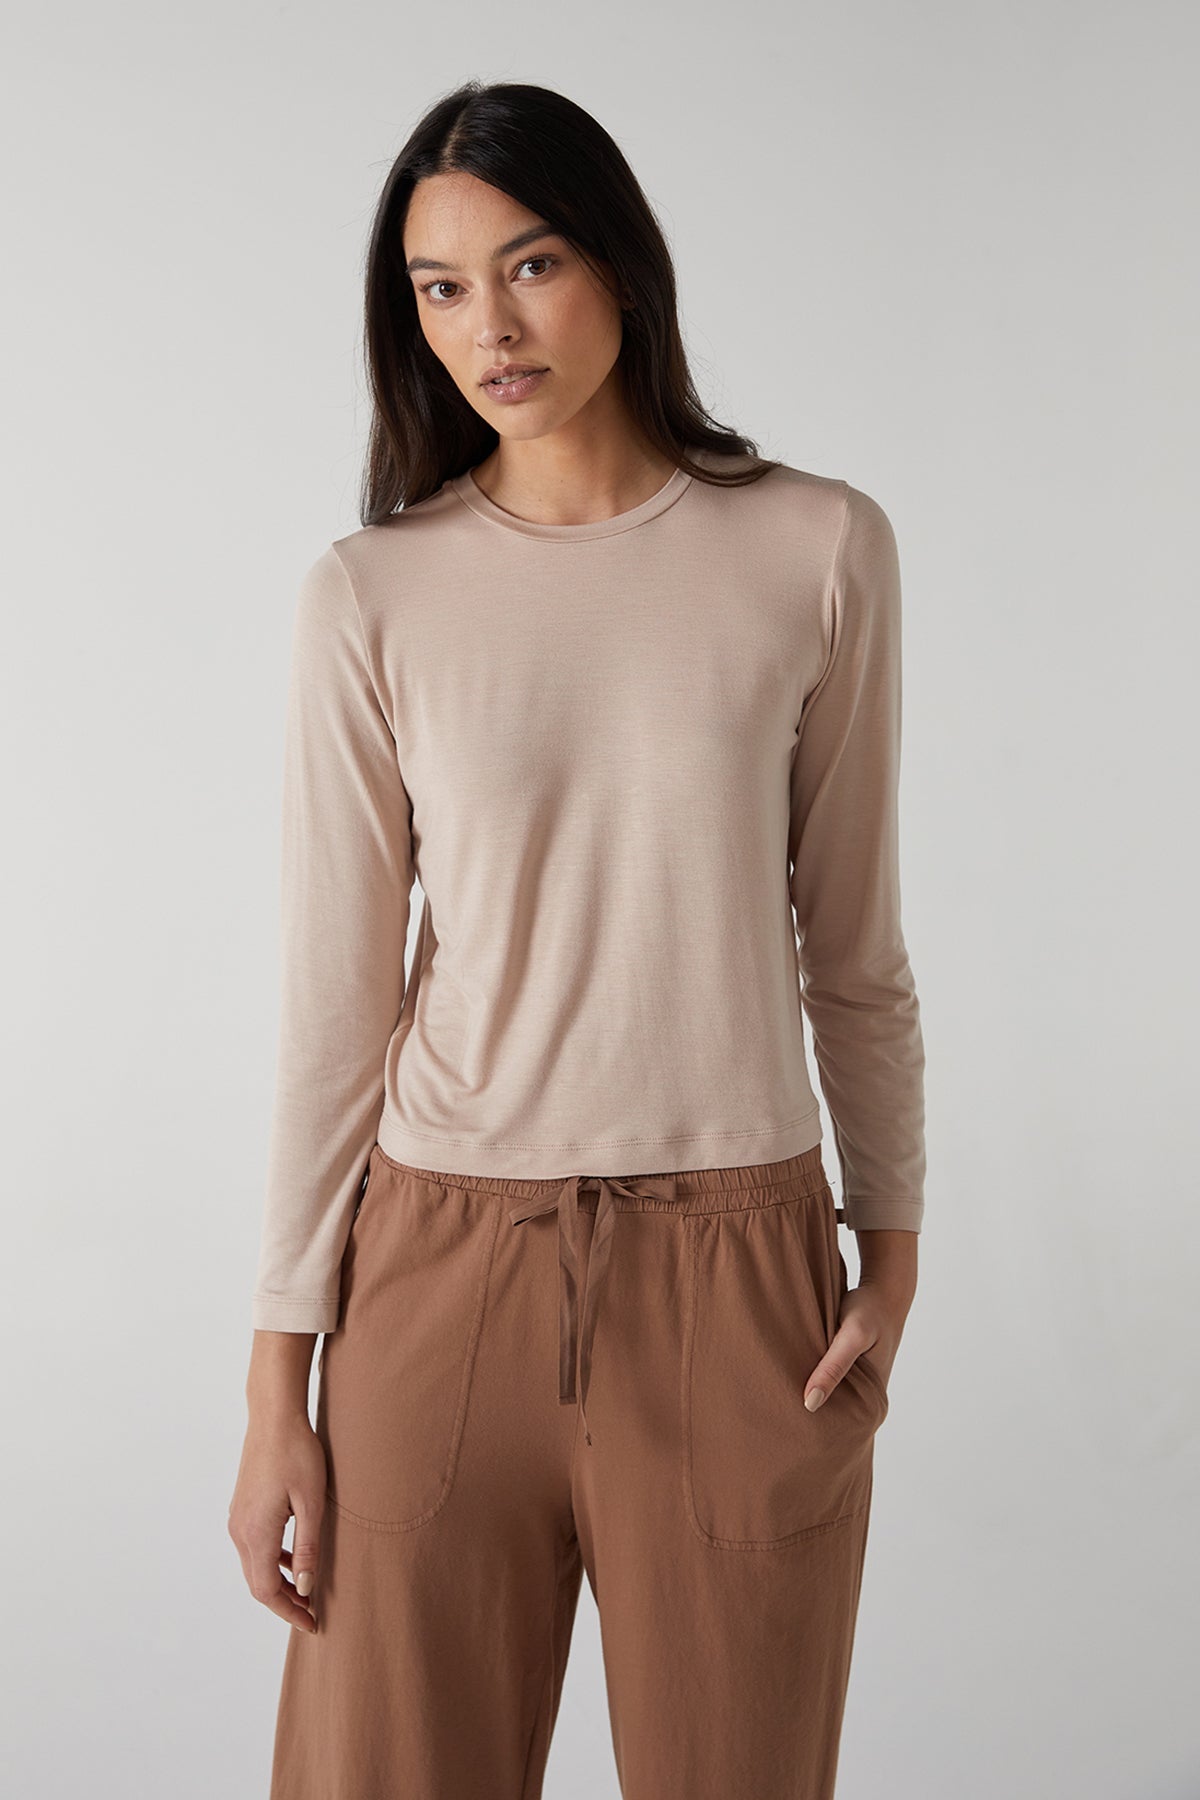 PACIFICA TEE IN NUDE